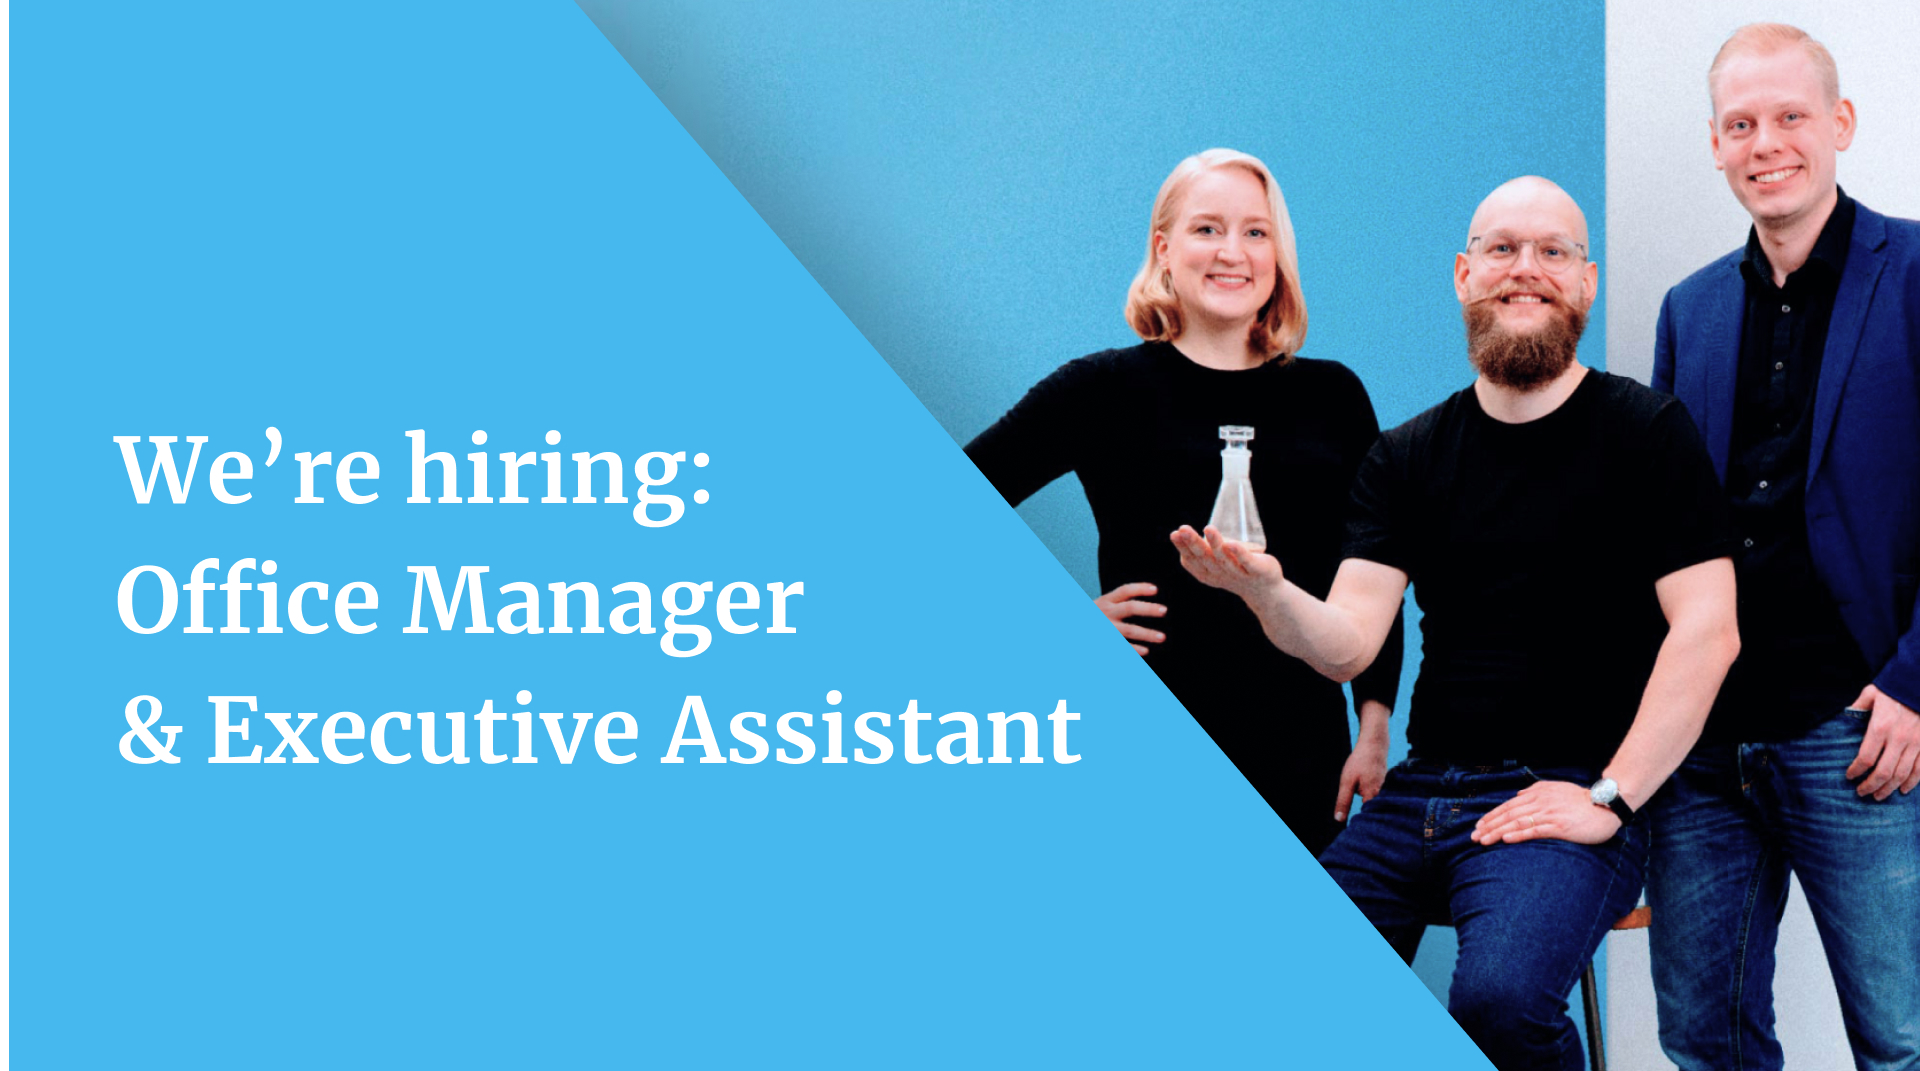 We're hiring an office manager and executive assistant